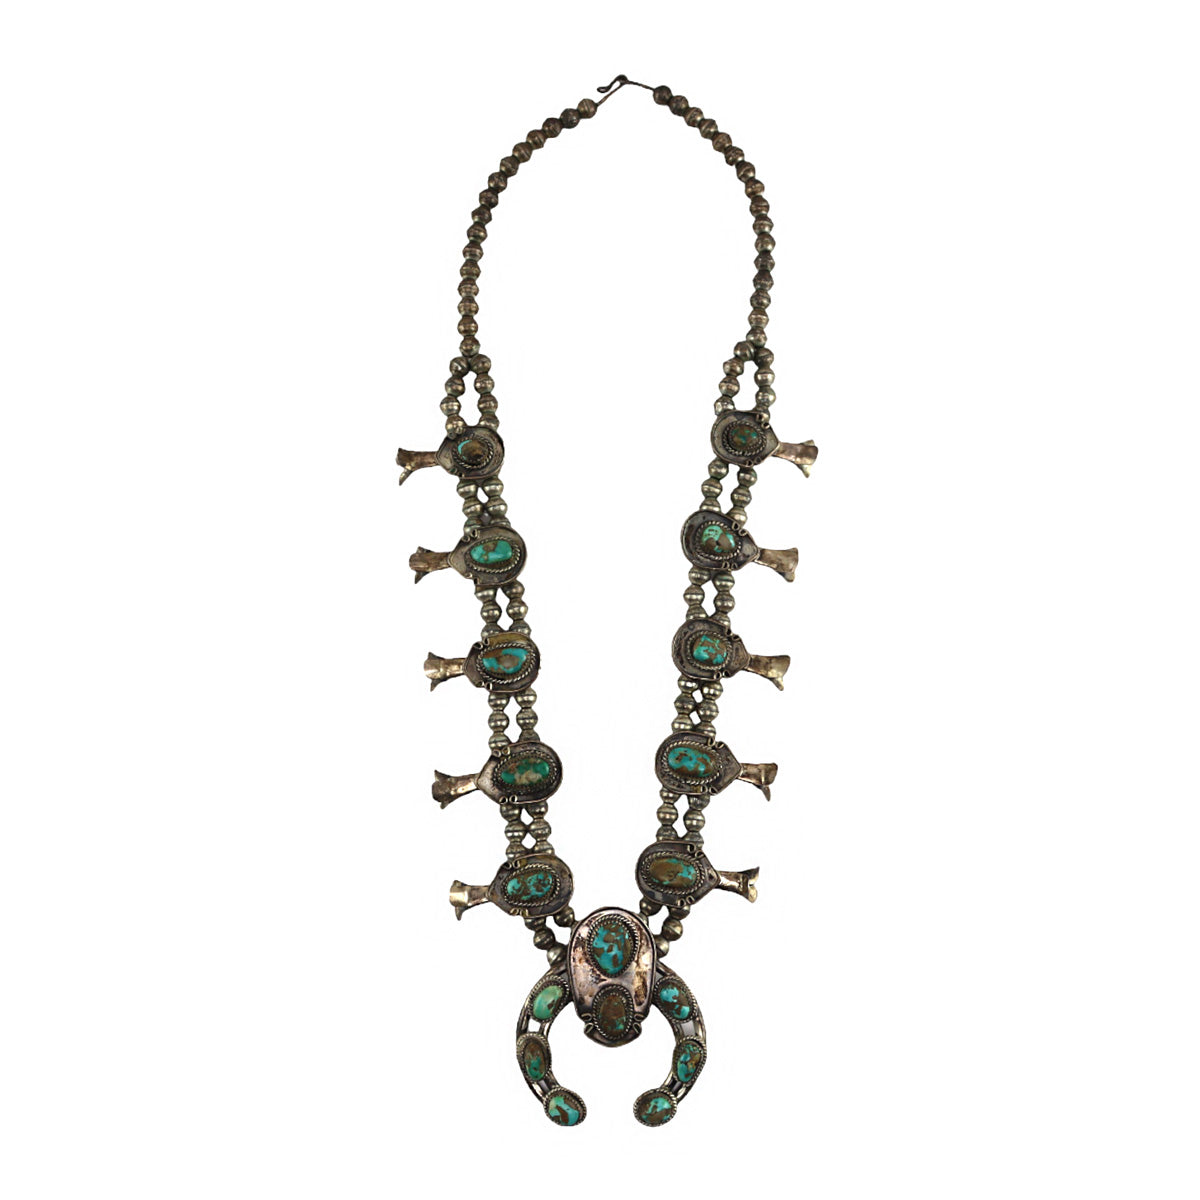 Navajo - Turquoise and Silver Squash Blossom Necklace c. 1950s, 28" length (J16130-004)